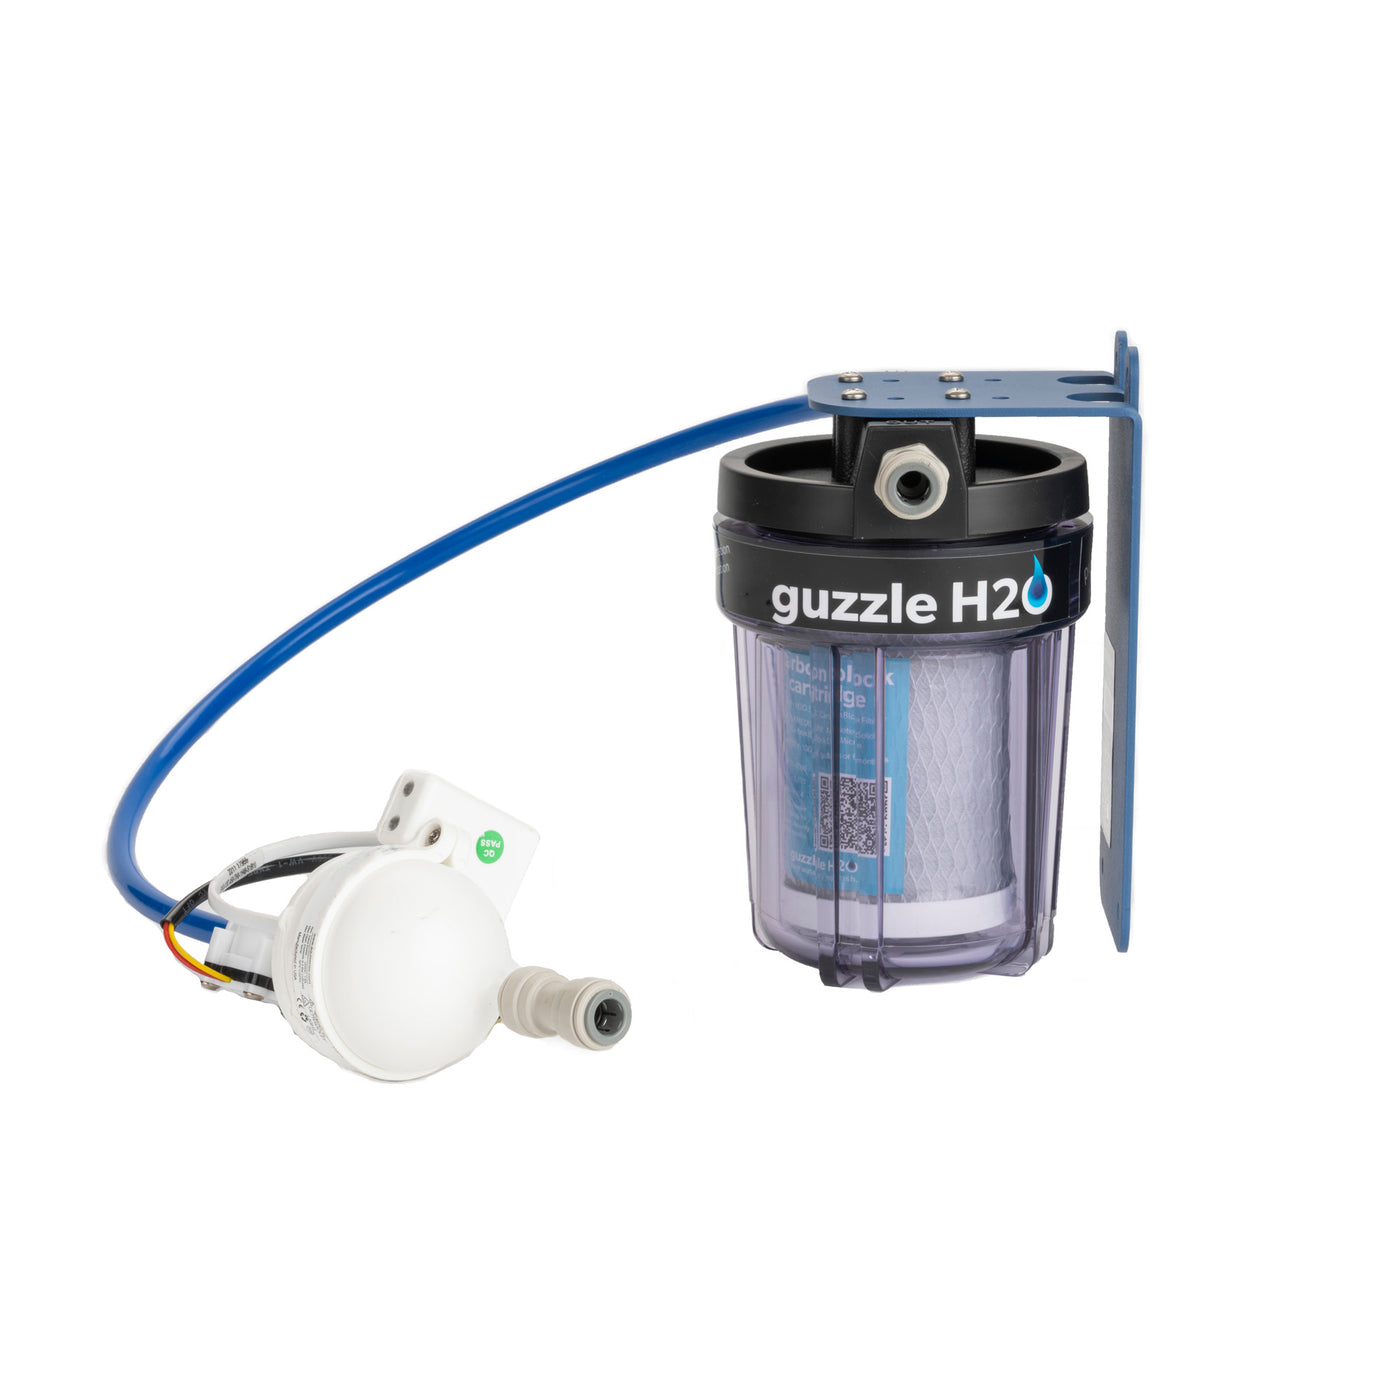 Guzzle H2O Stealth Flex - Built-in Water Purification and Filtration